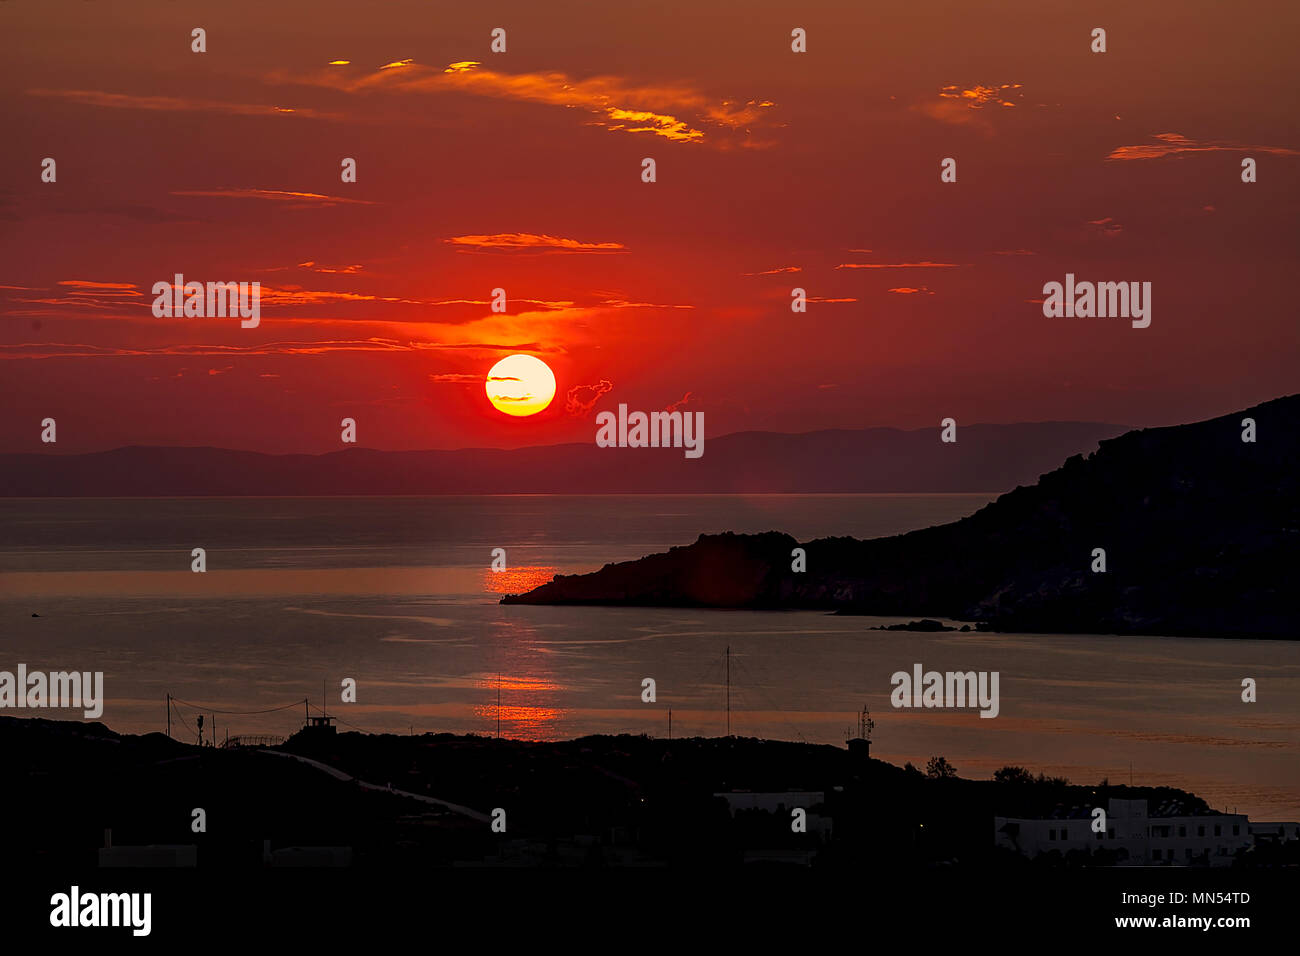 Scenic view at sunset. Stock Image Stock Photo